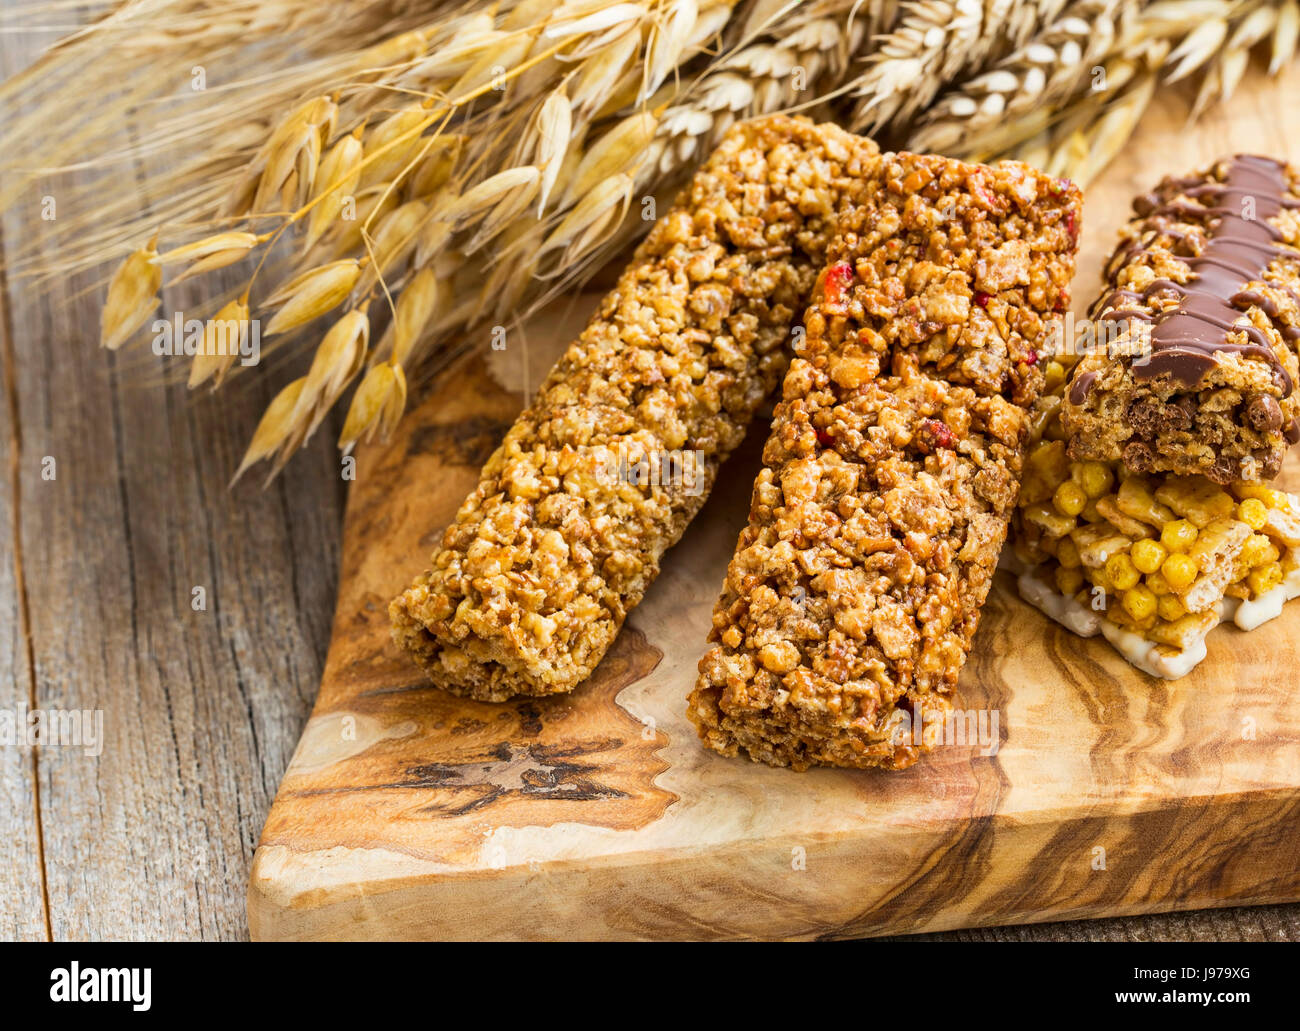 Healthy granola cereal bars with wheat ears on wooden board Stock Photo